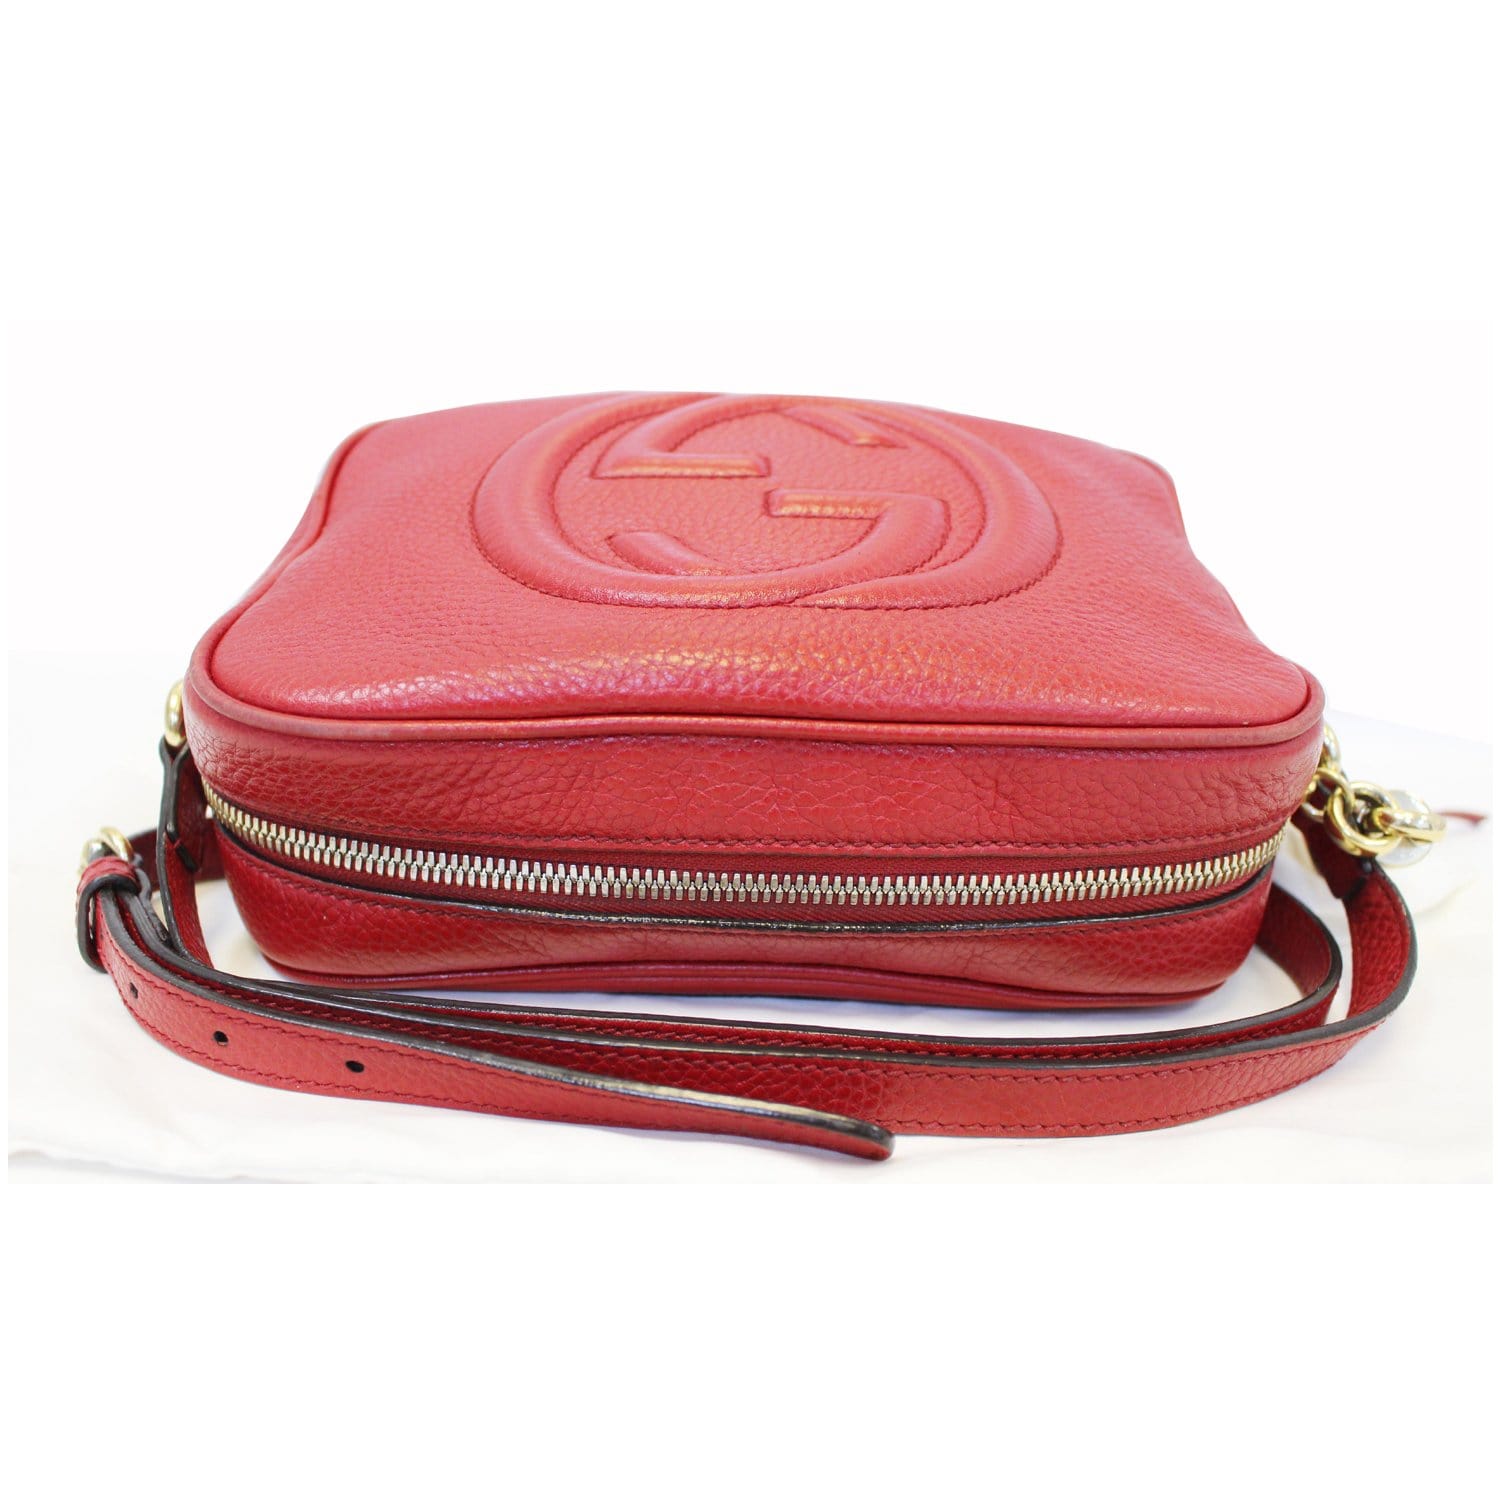 GUCCI Soho Disco Pebbled Leather Small Crossbody Bag Red-US